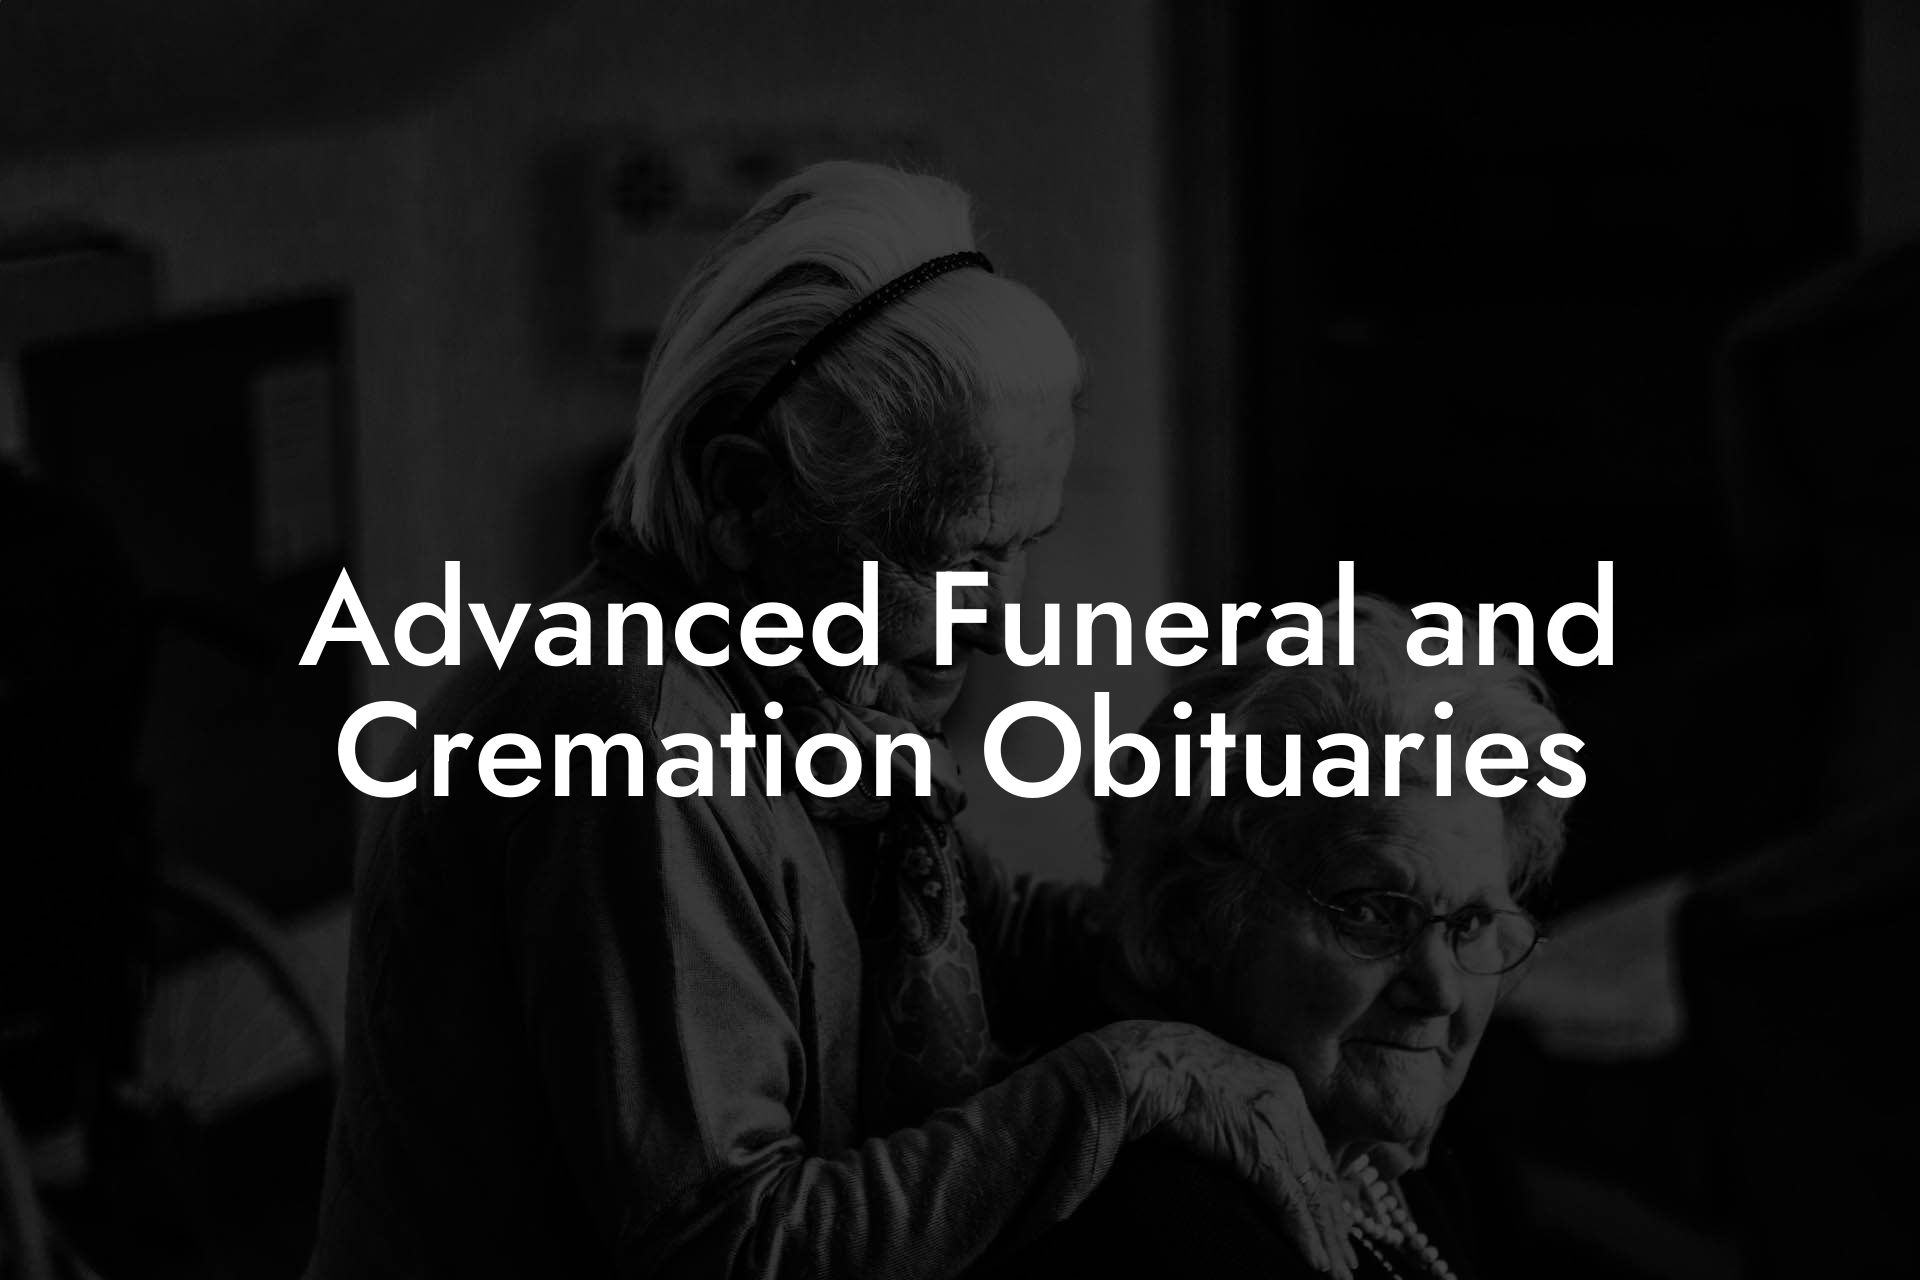 Advanced Funeral and Cremation Obituaries